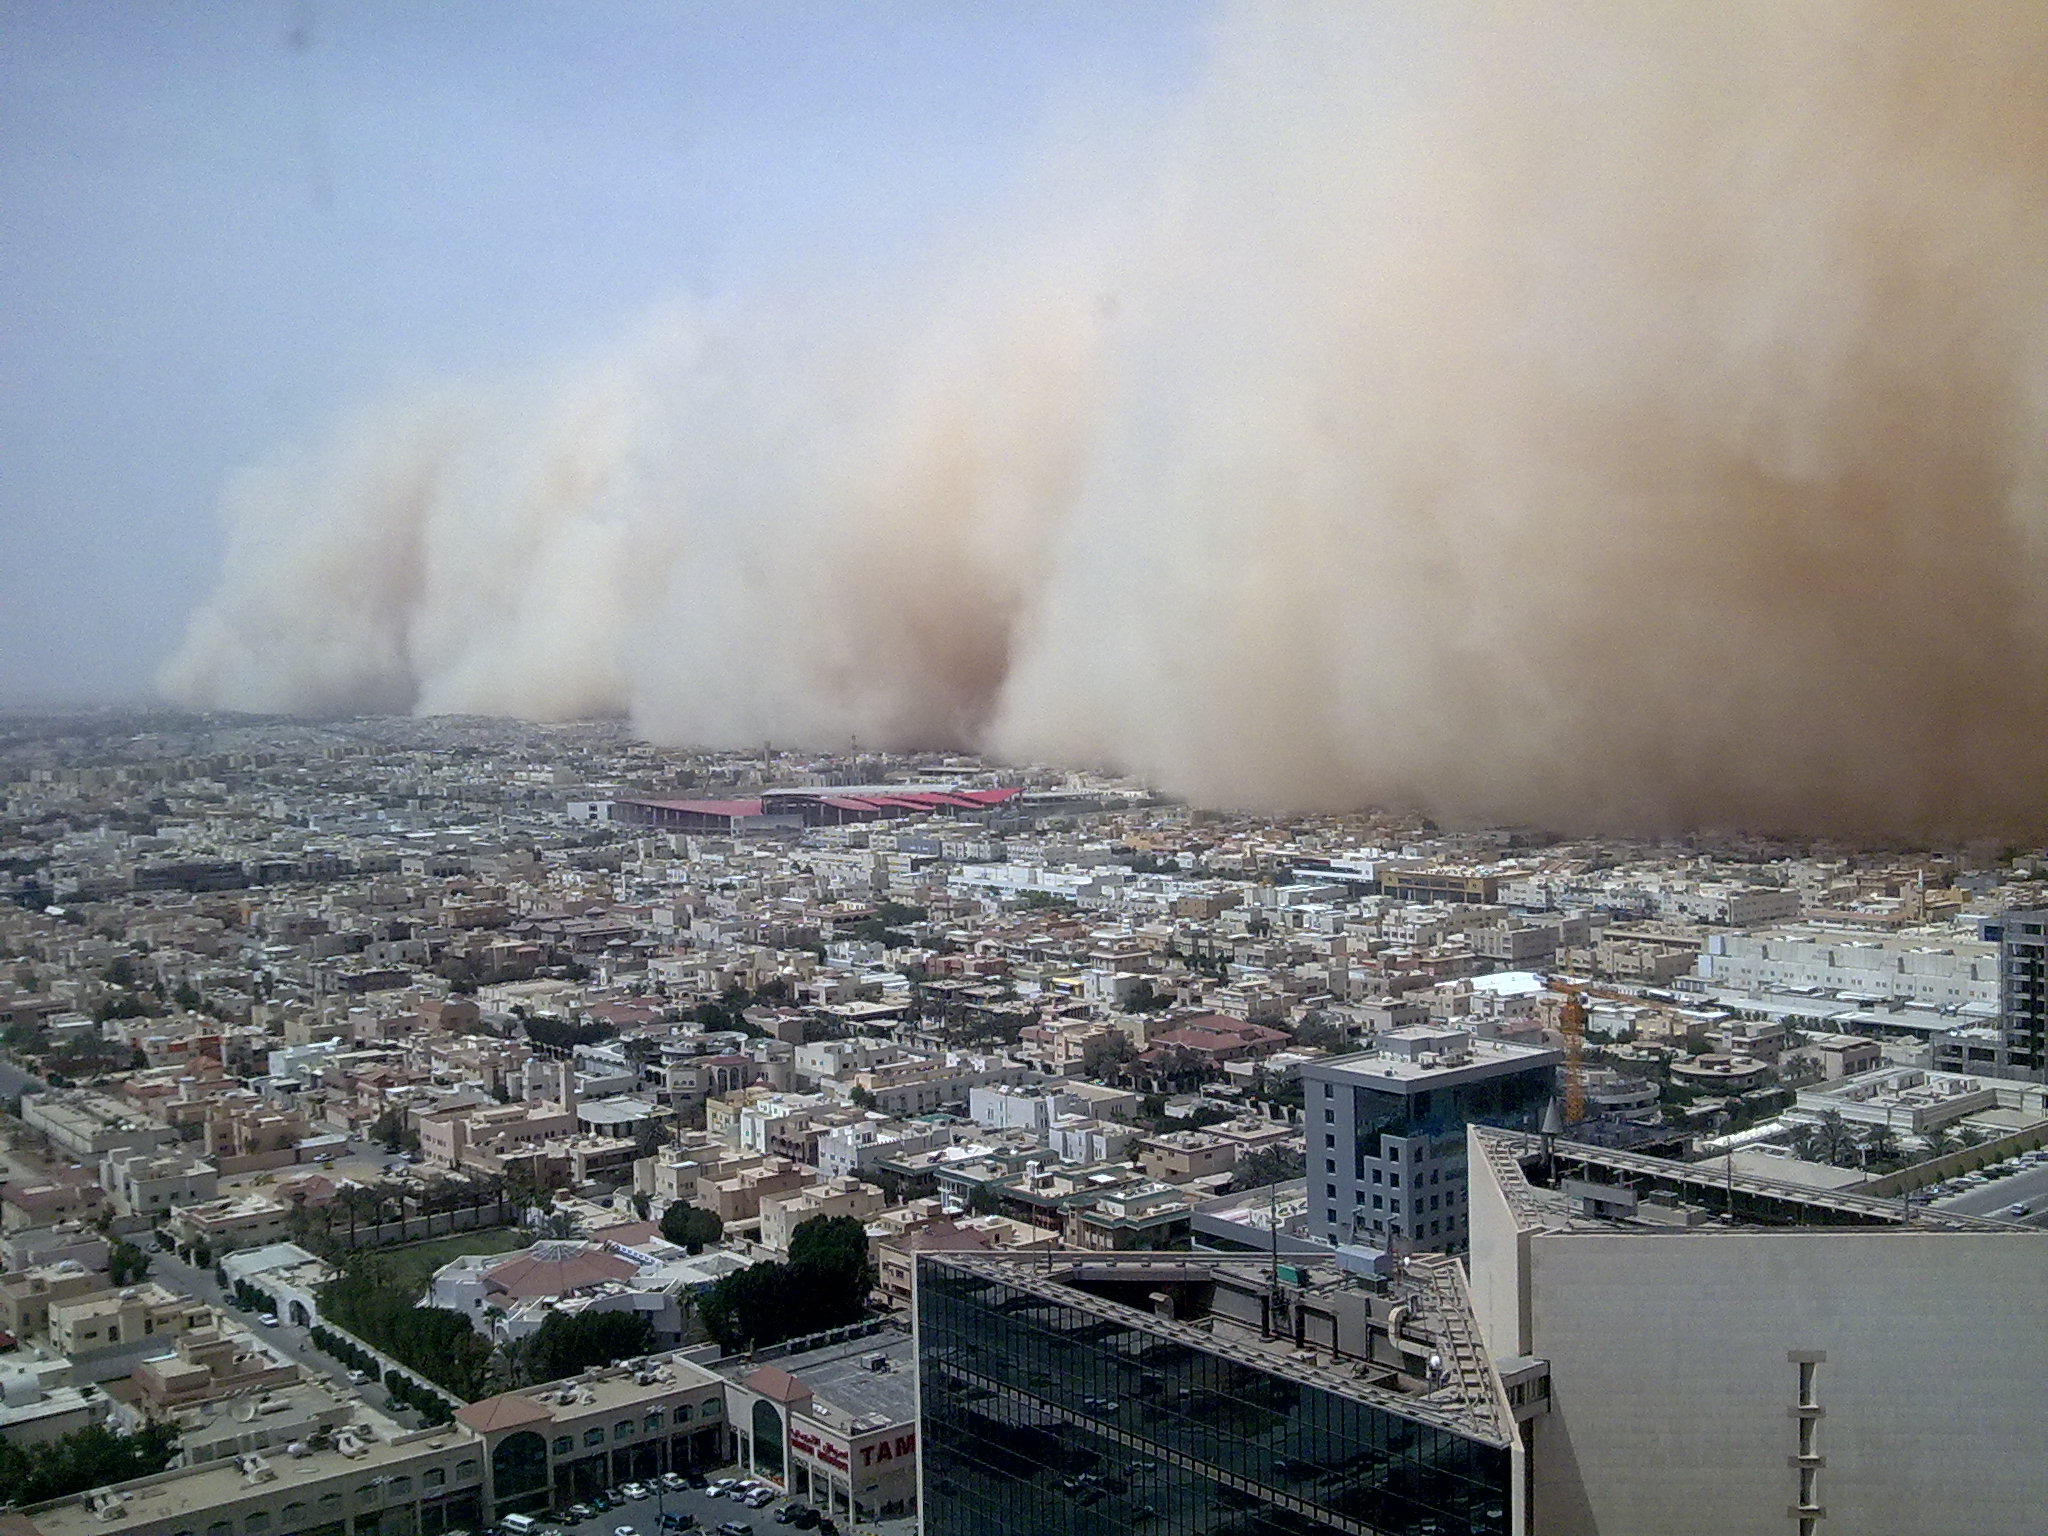 What causes a sandstorm?